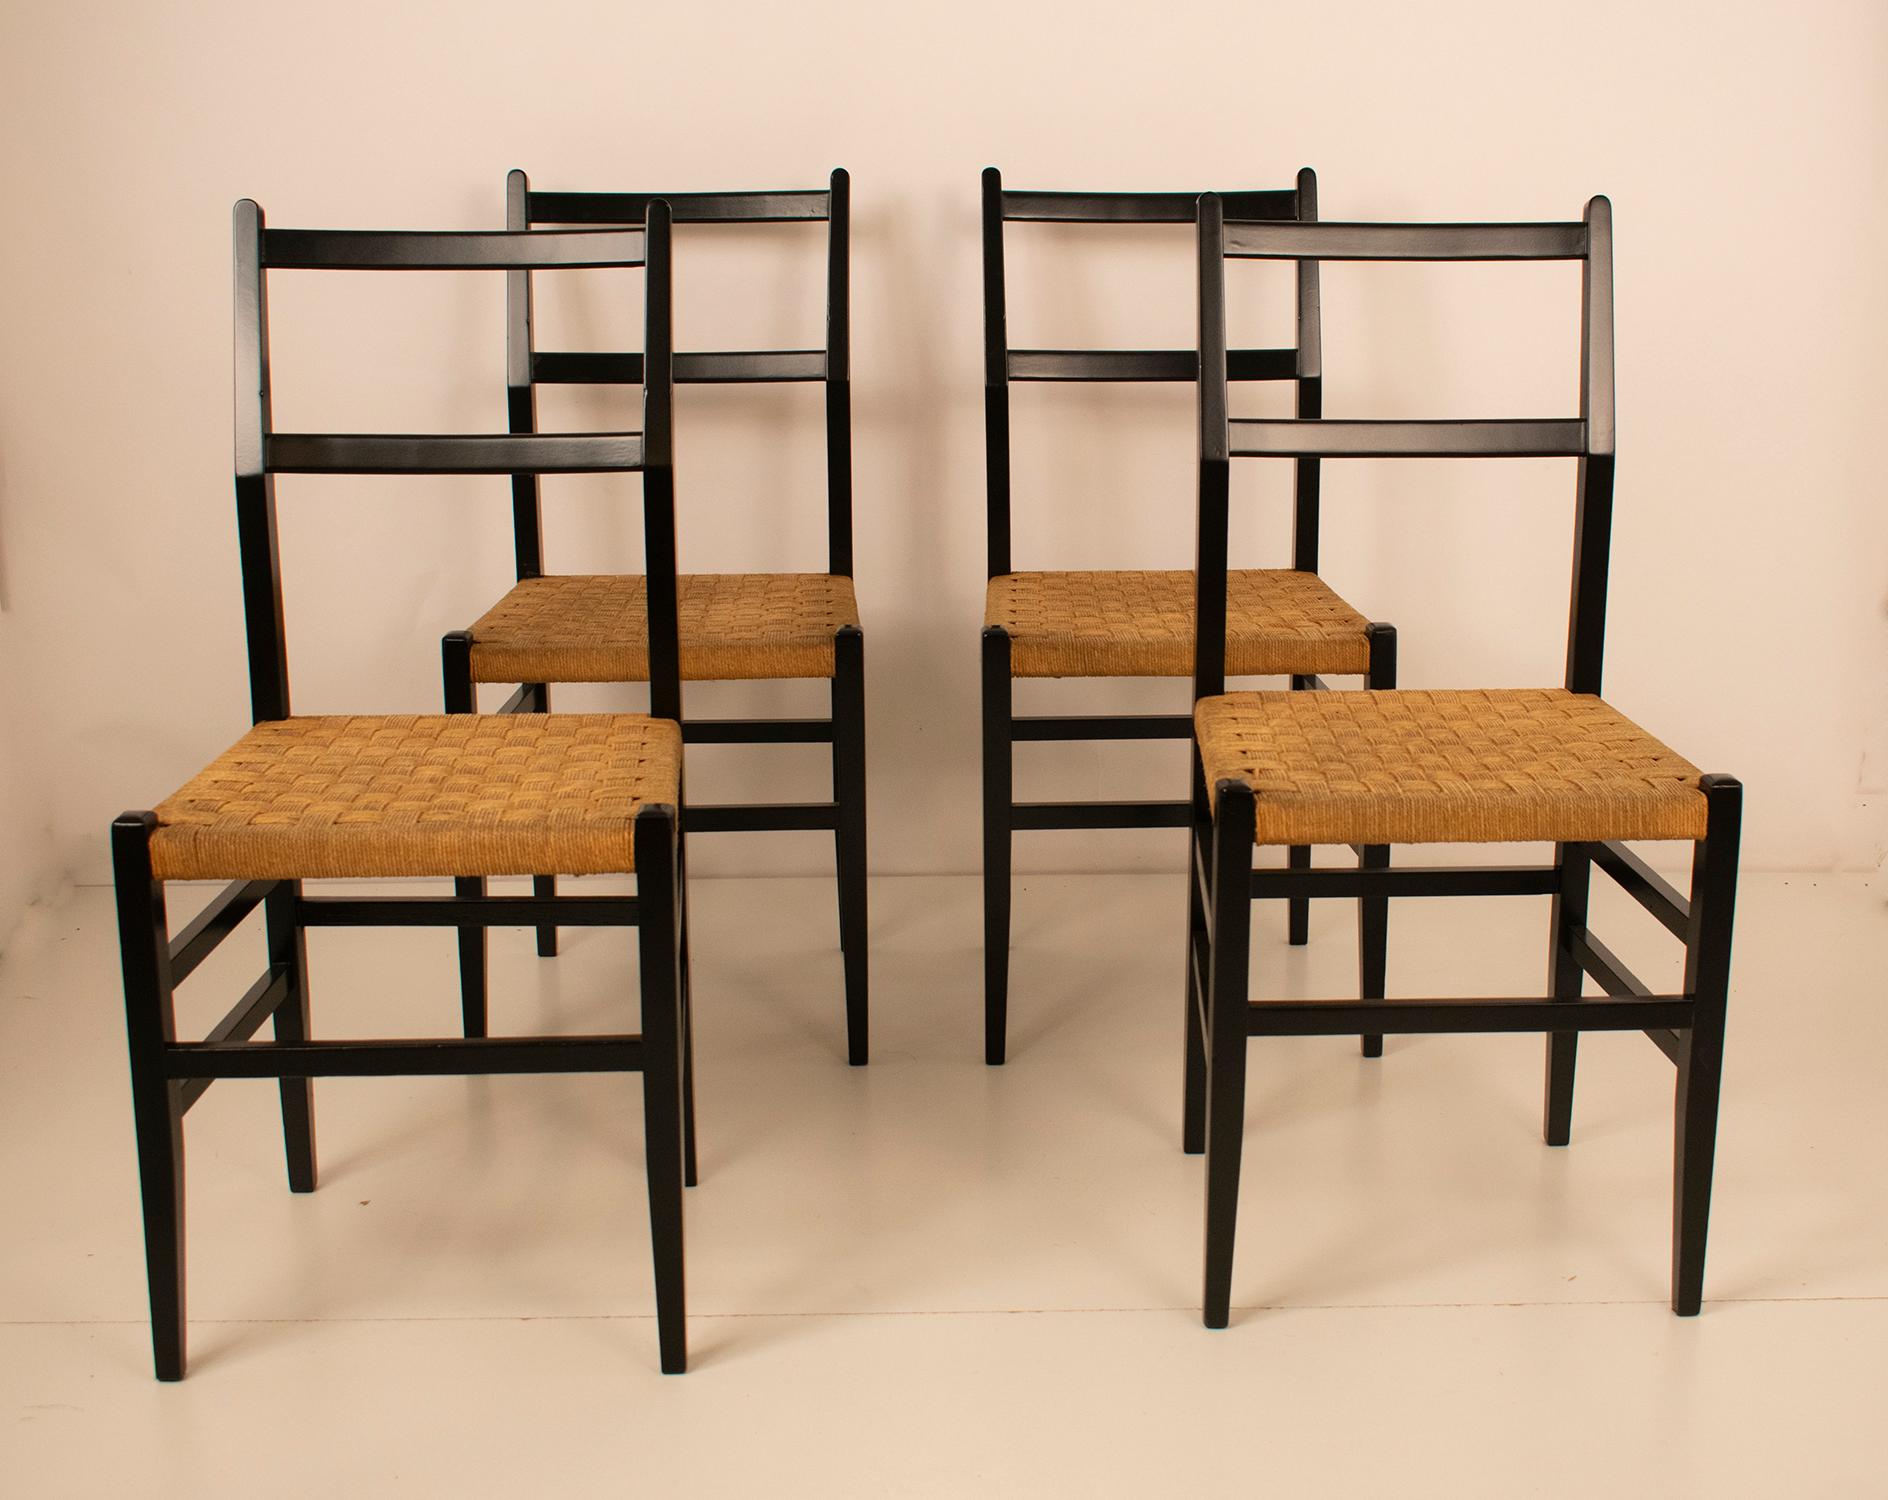 Set of 4 chairs, In black lacquered wood and Cane seat. Spain 1950s.
The wood has been lacquered again, the seat is in its original state, which is in good condition, only there are some stains
The 699 Superleggera chair, designed in 1957 by the